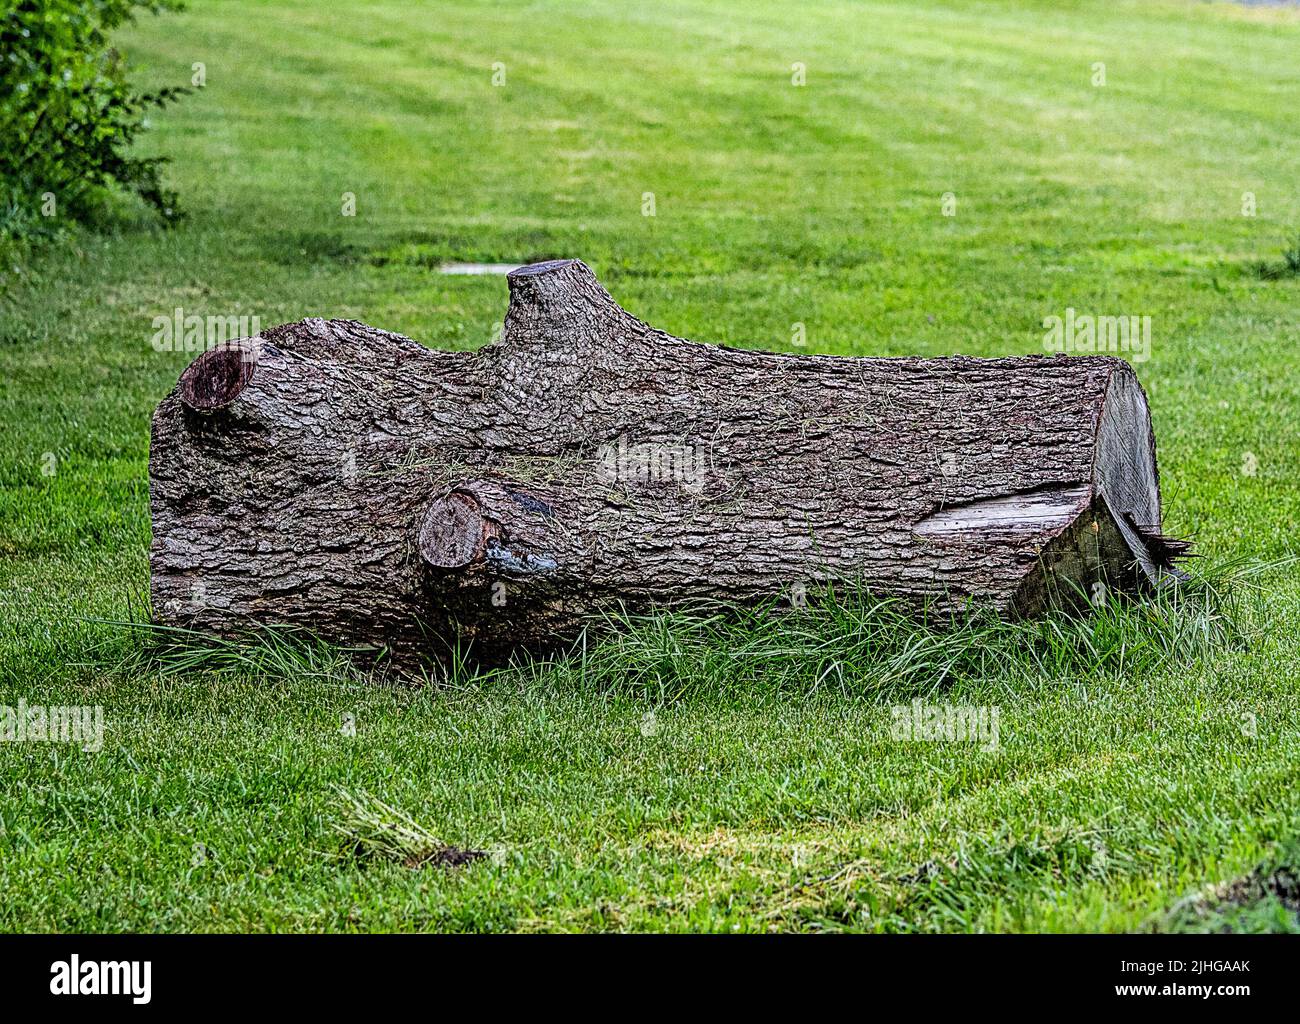 Large cutdown Log lying on grass with deeply grooved bark Stock Photo